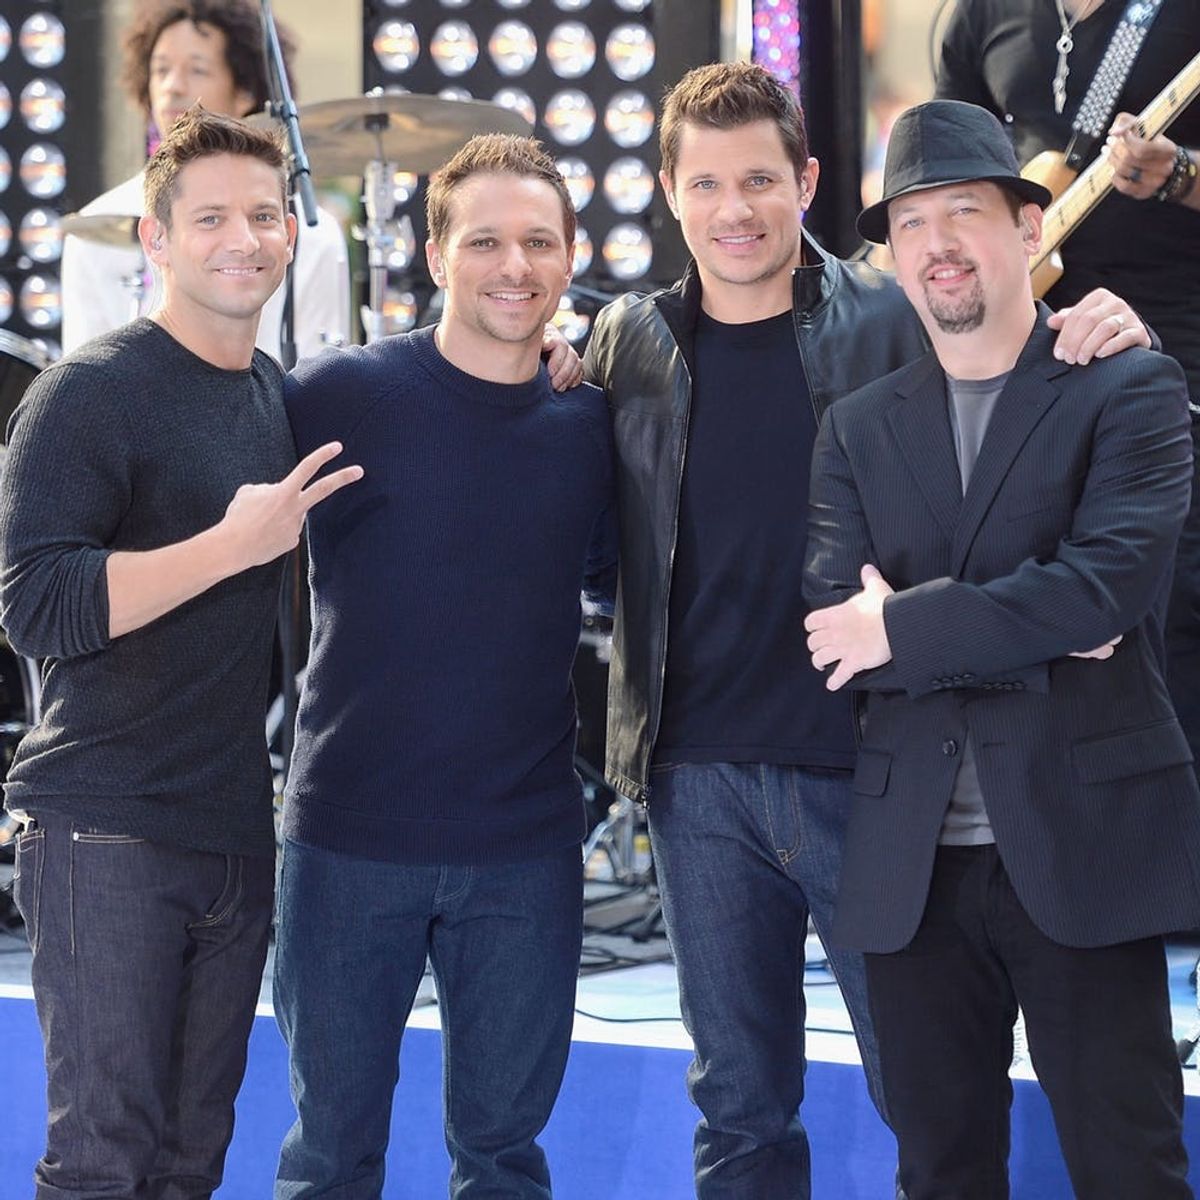 98 Degrees Just Teased a Christmas Album and Holiday Tour Because Wishes Do Come True